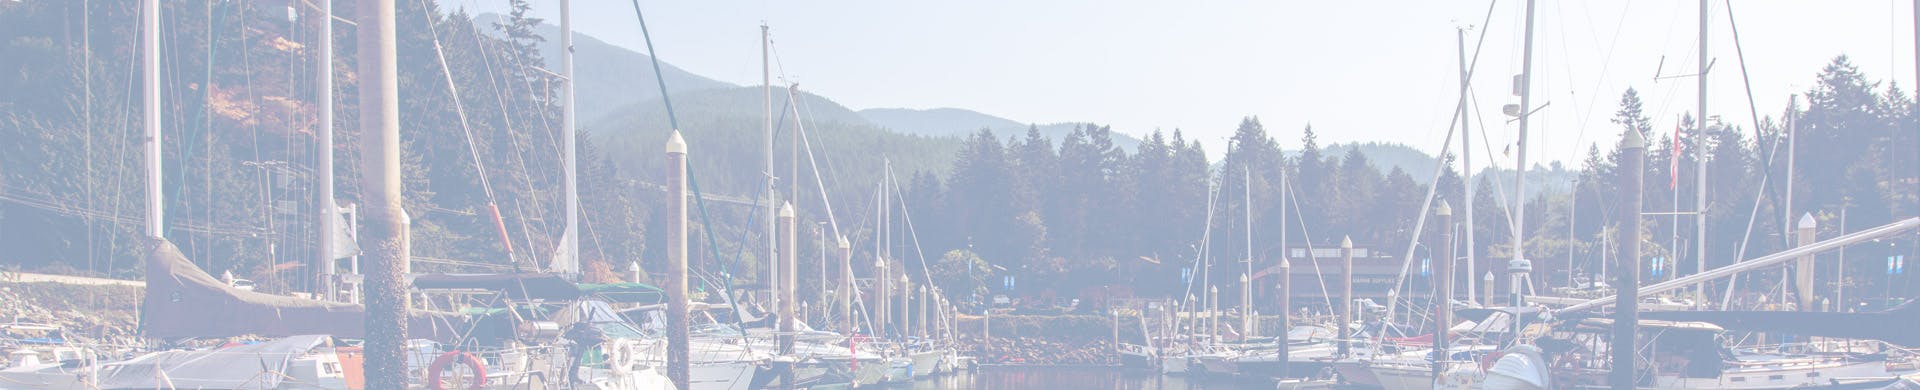 yacht sales west sidney bc